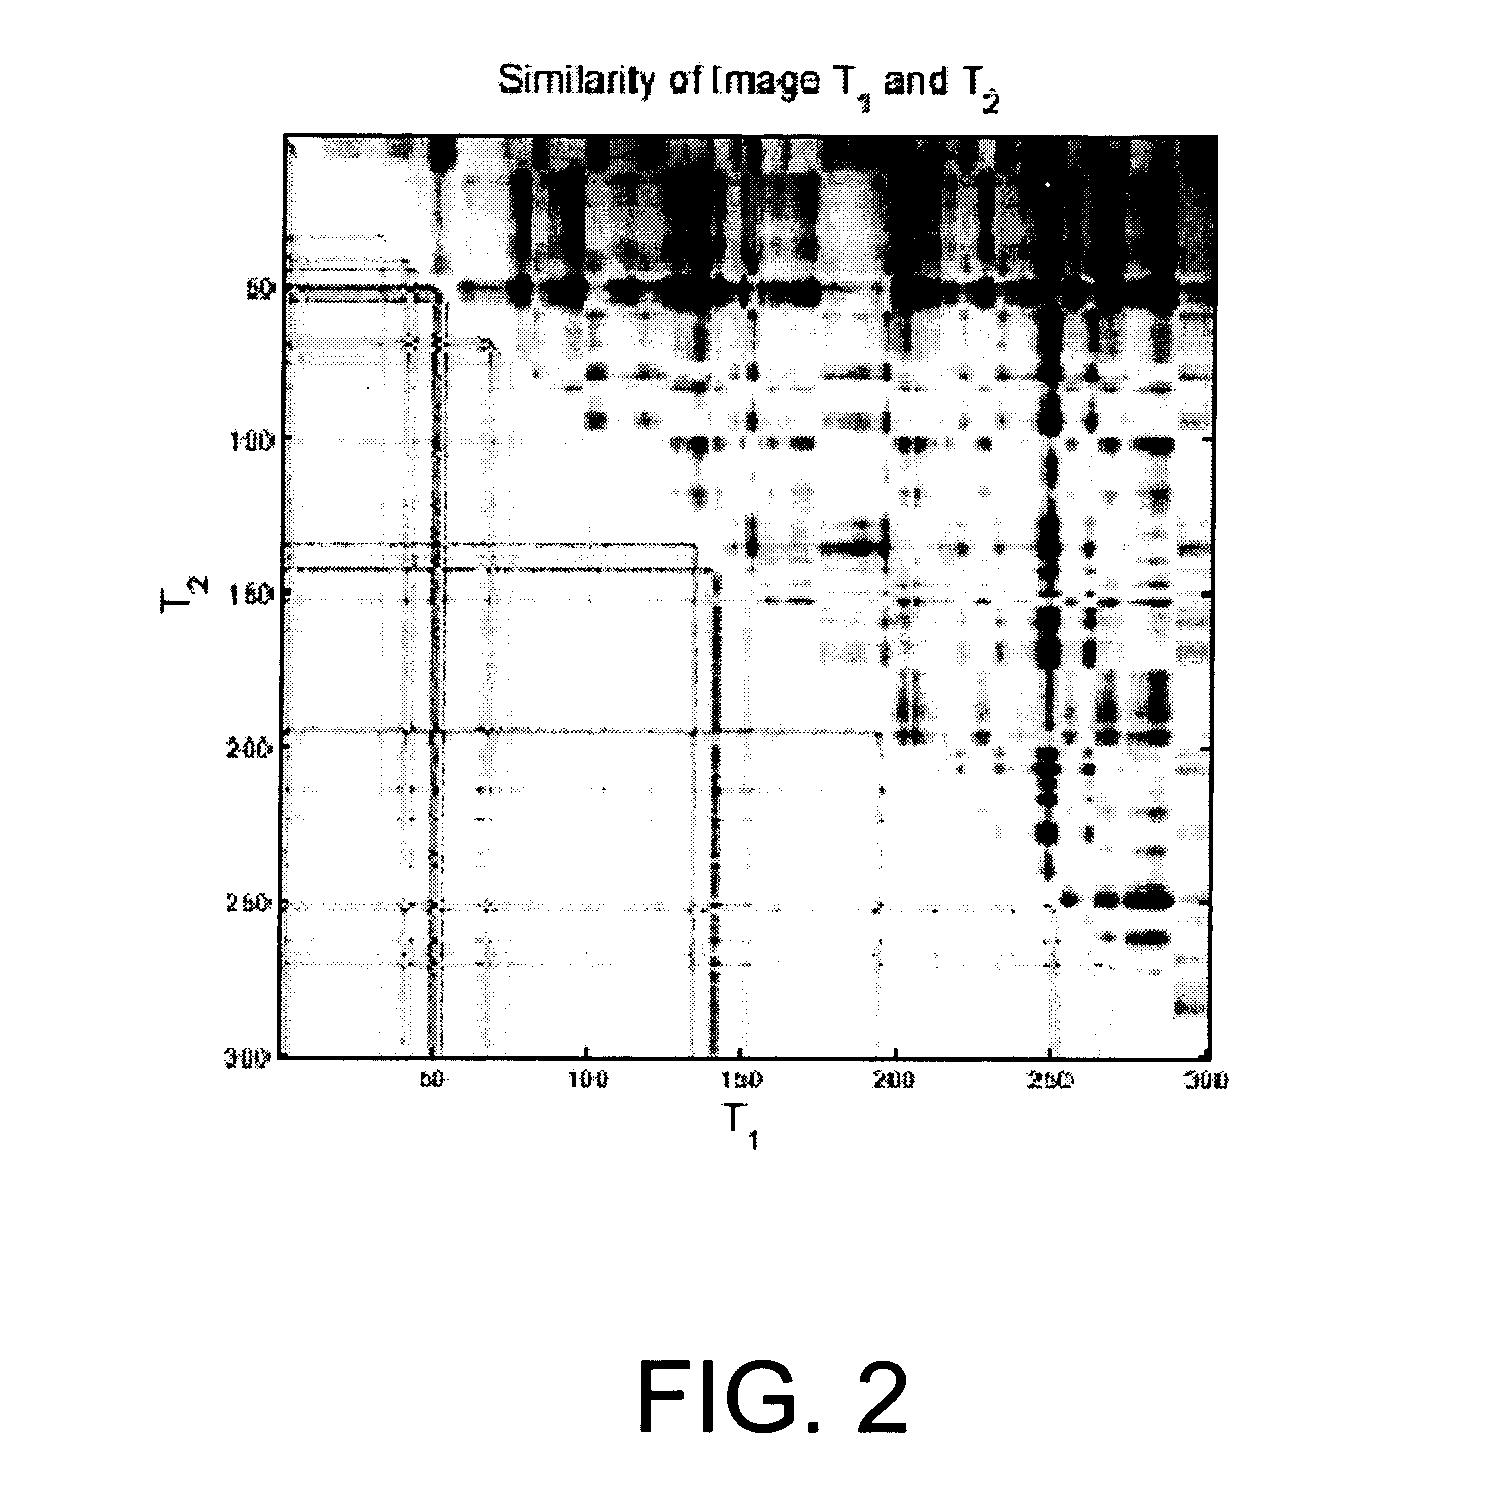 System and method for audio/video speaker detection